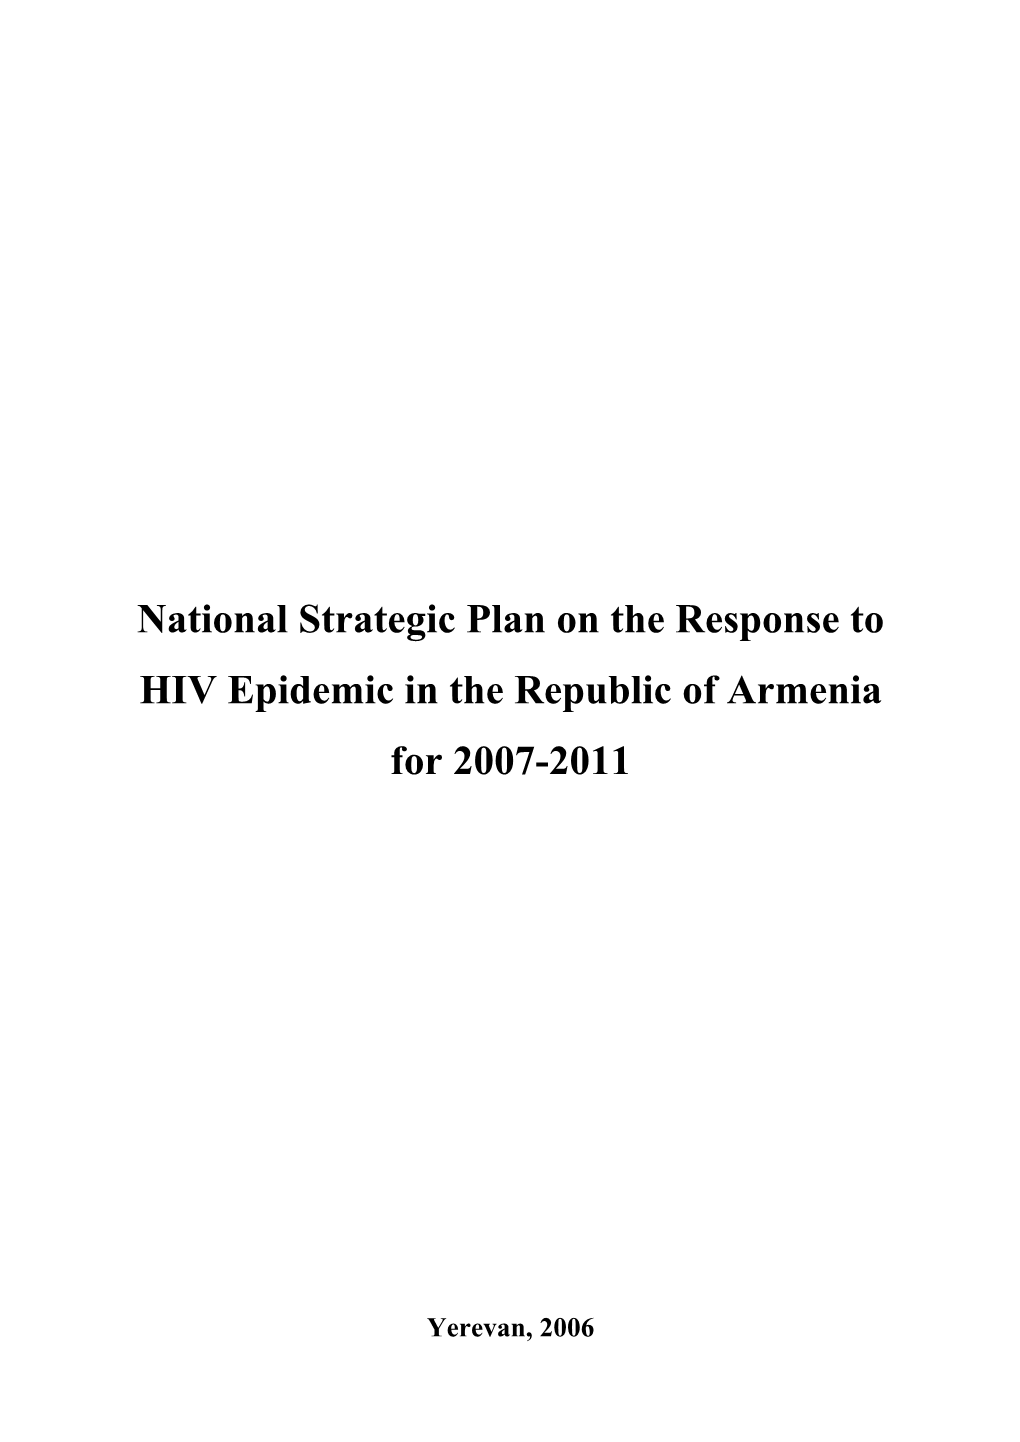 National Strategic Plan on the Response to HIV Epidemic in the Republic of Armenia for 2007-2011